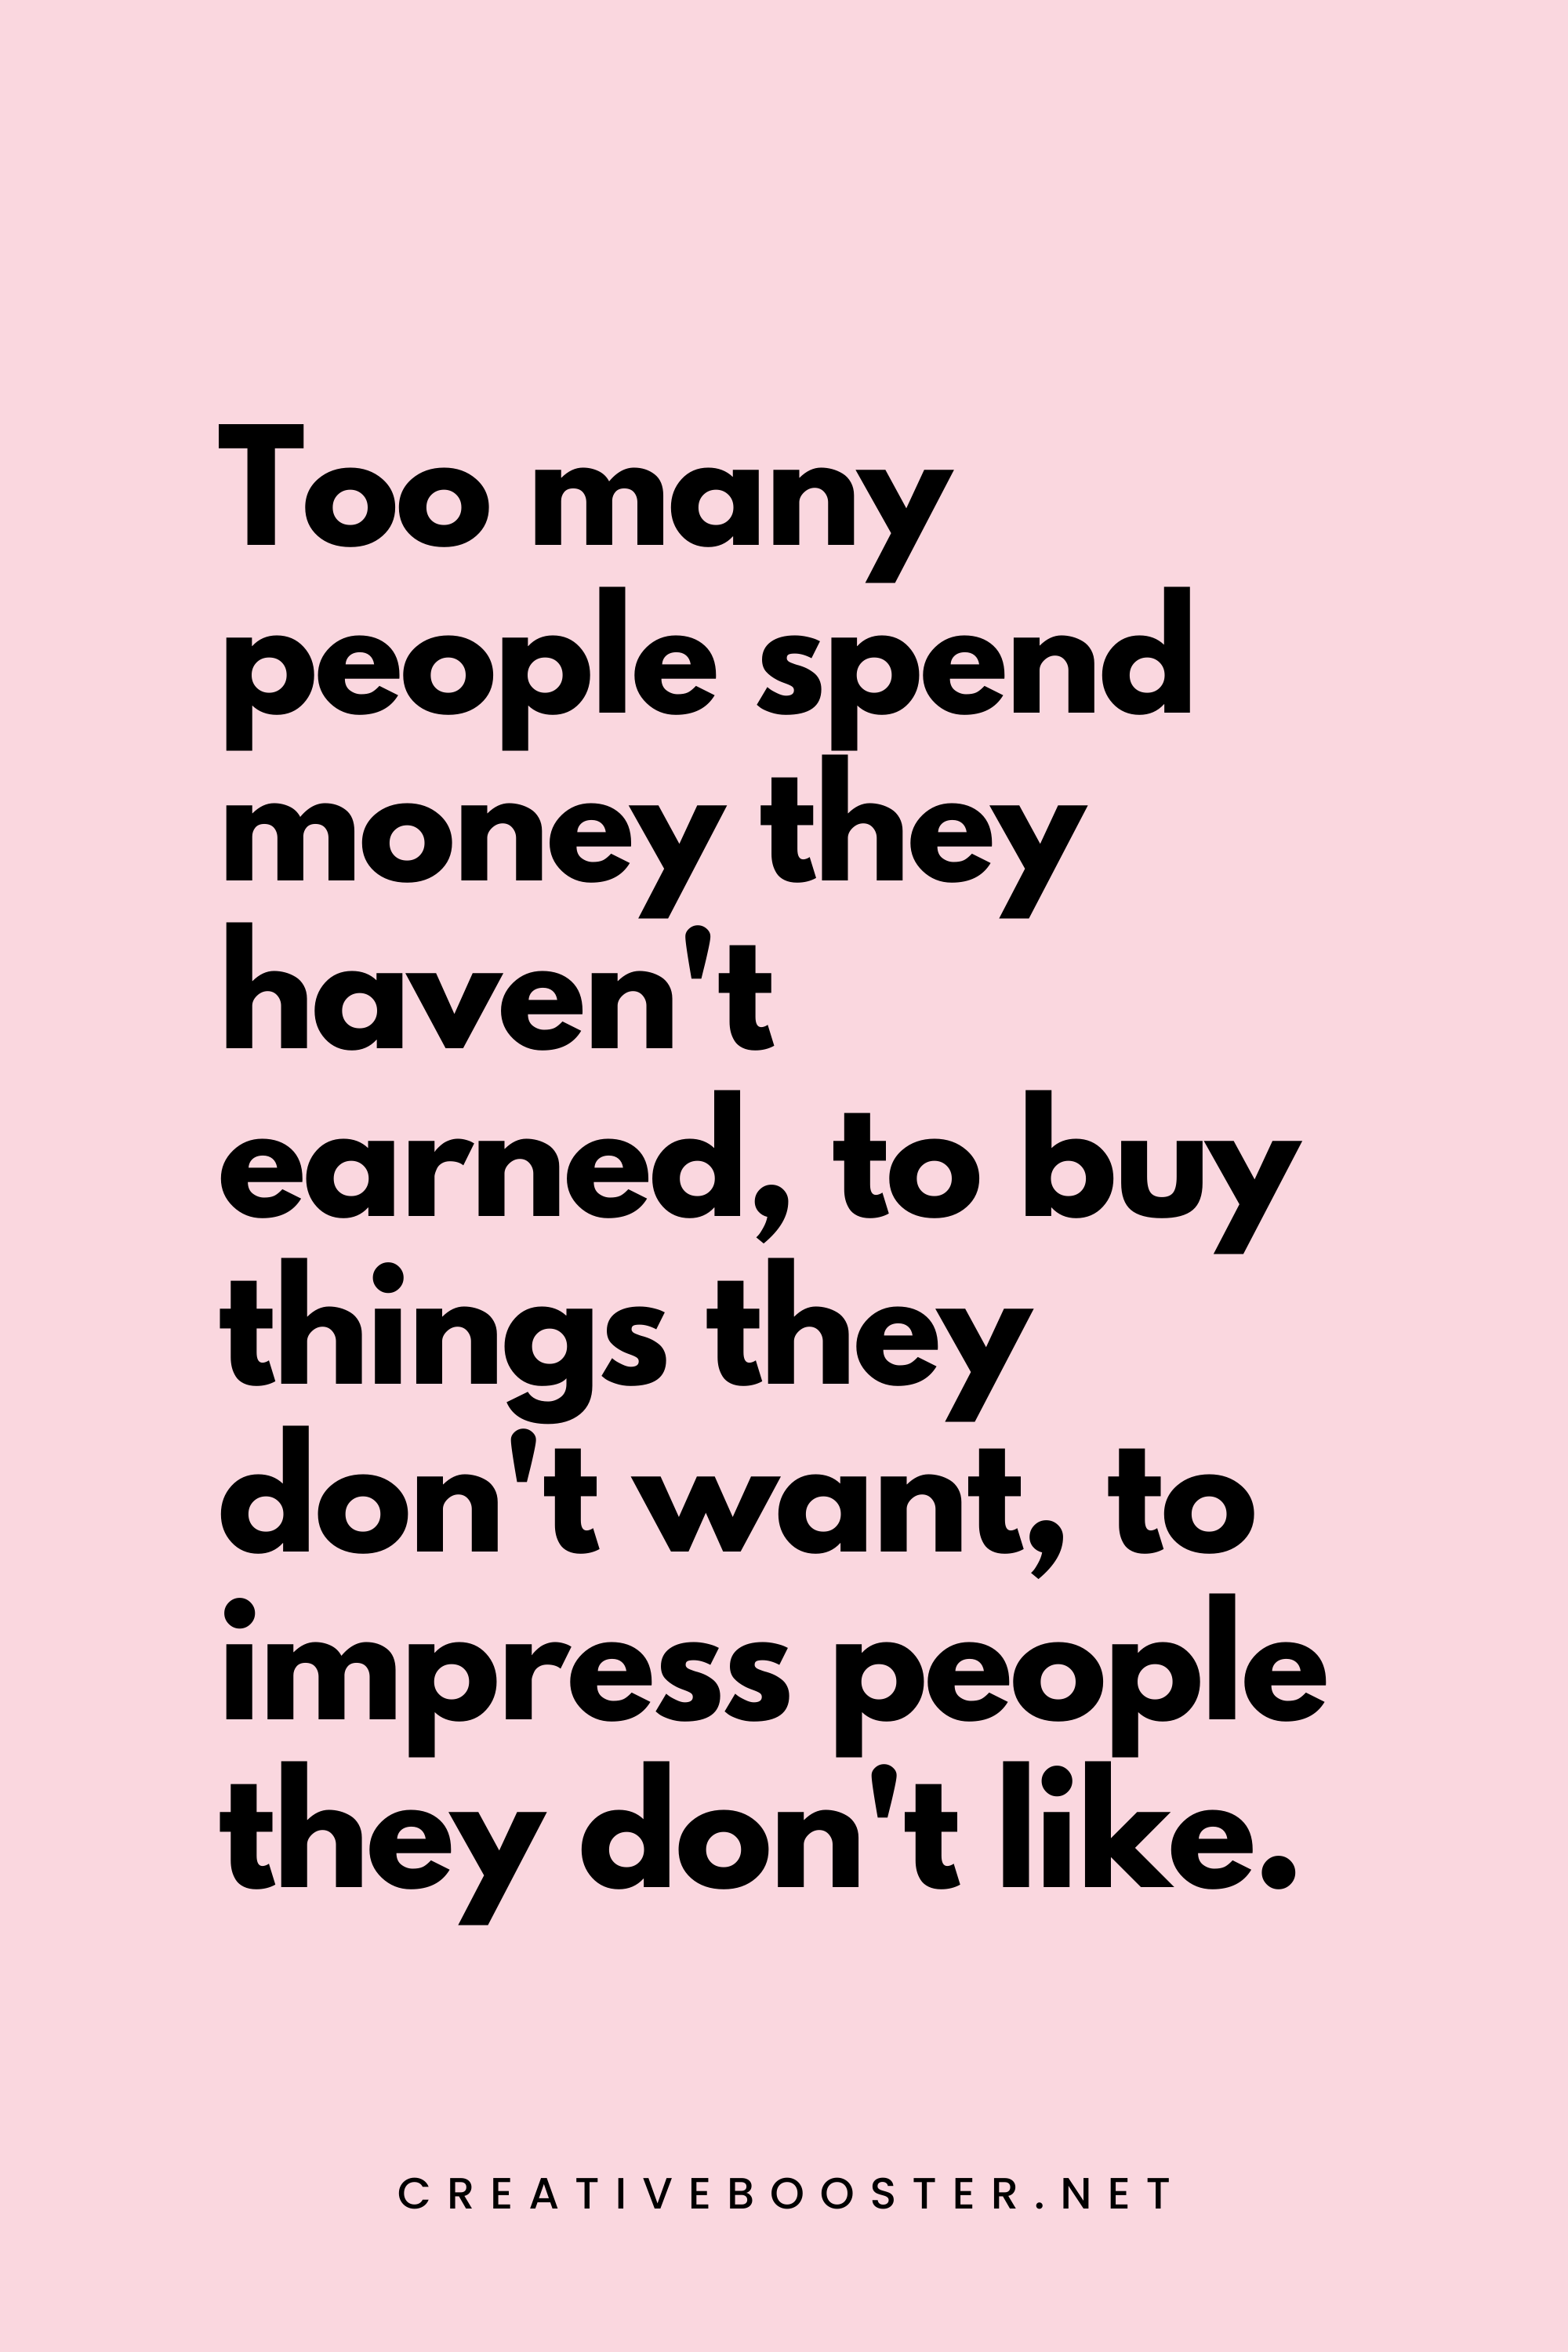 32. Too many people spend money they haven't earned, to buy things they don't want, to impress people they don't like. - Will Rogers - 3. Financial Freedom Quotes for Students